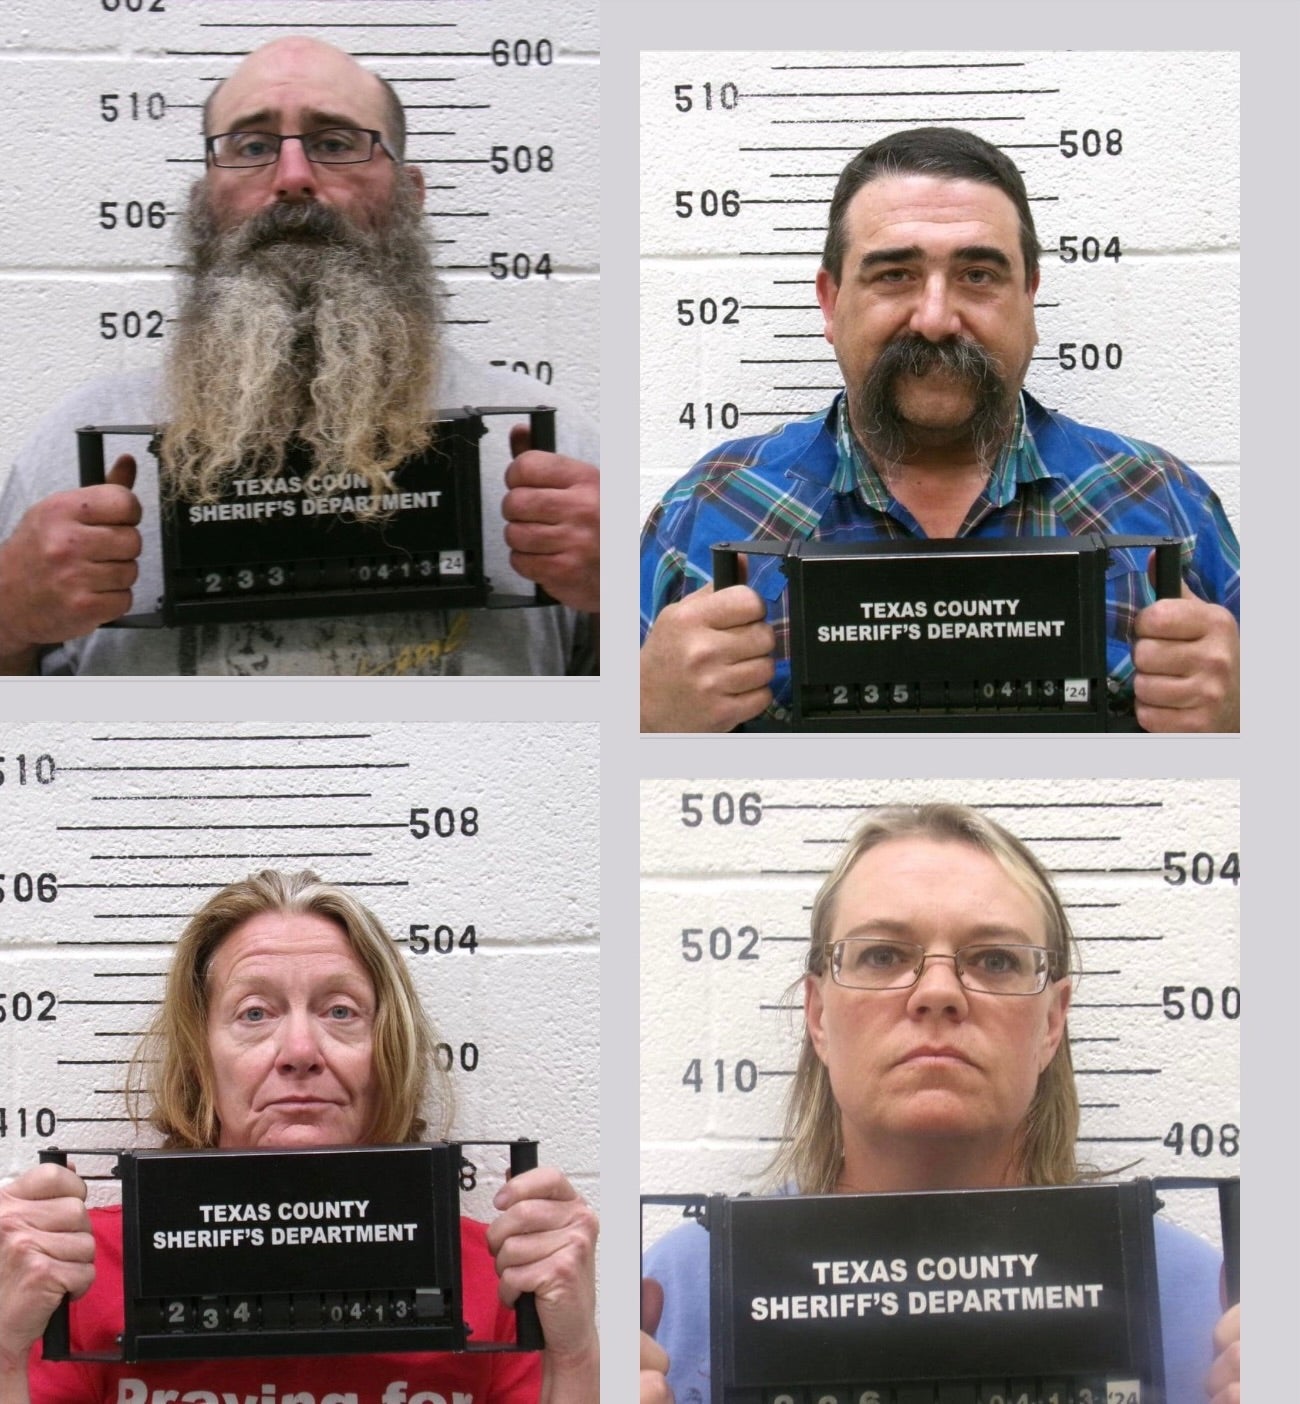 Tad Bert Cullum, 43, Tifany Machel Adams, 54, Cole Earl Twombly, 50 and Cora Twombly were arrested and charged with murder in connection with the disappearance of Veronica Butler, 27, and Jilian Kelley, 39.